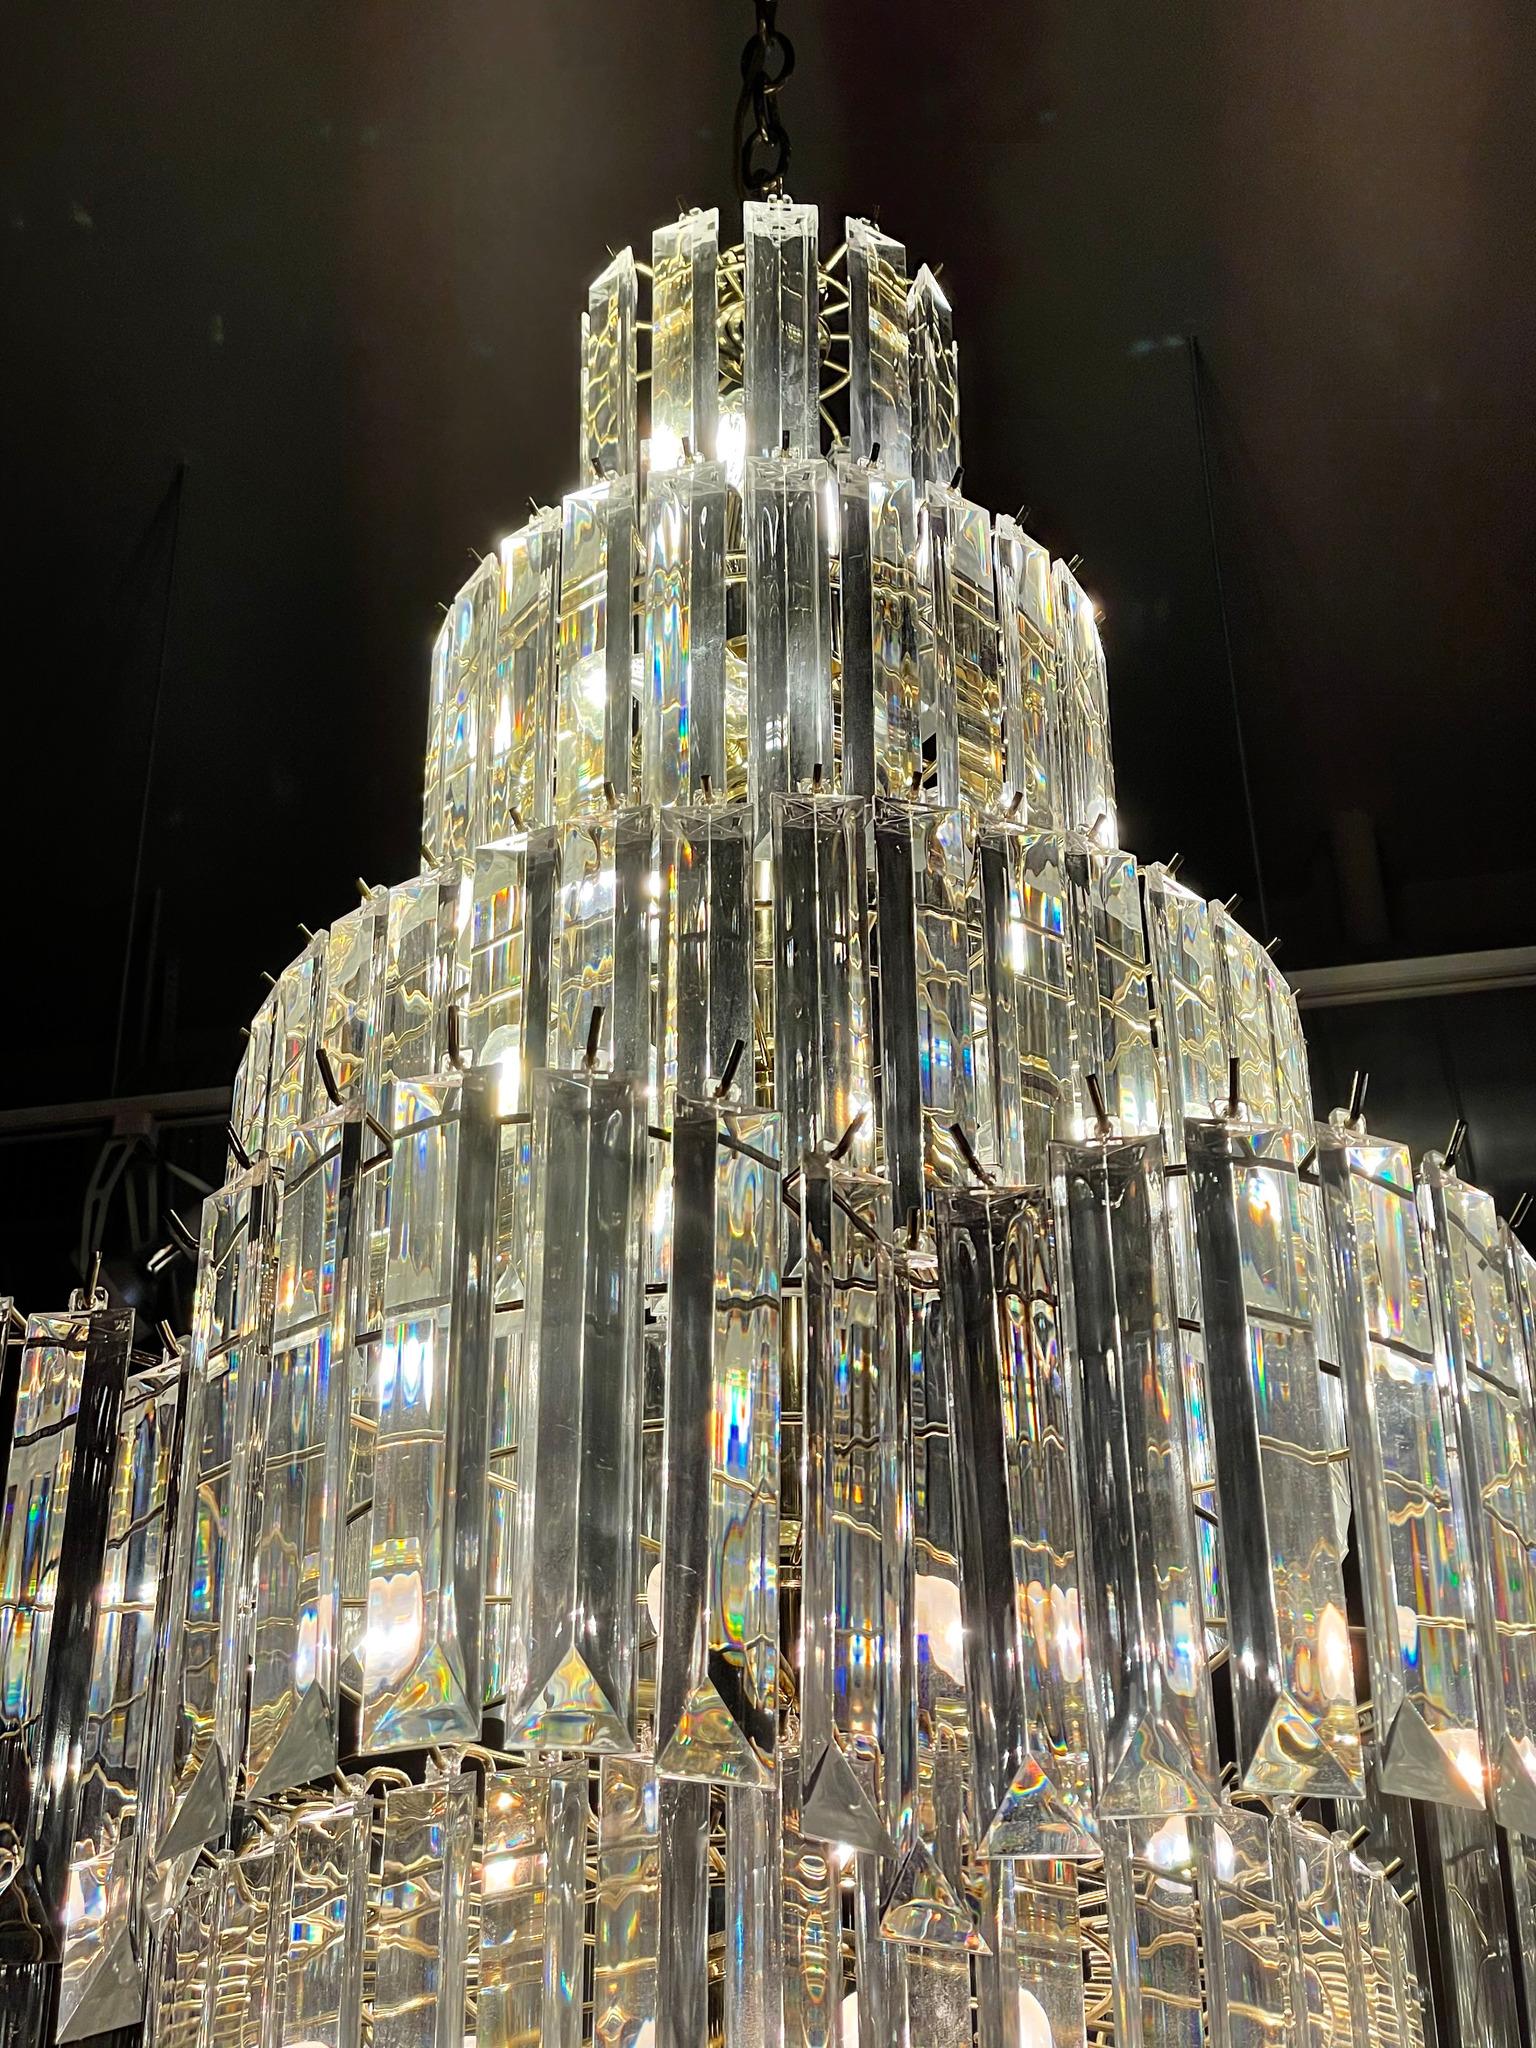 Gorgeous and enormous Lucite chandelier with 7 tiers. Excellent for an entry way or any space with high ceiling.

Dimensions: 24